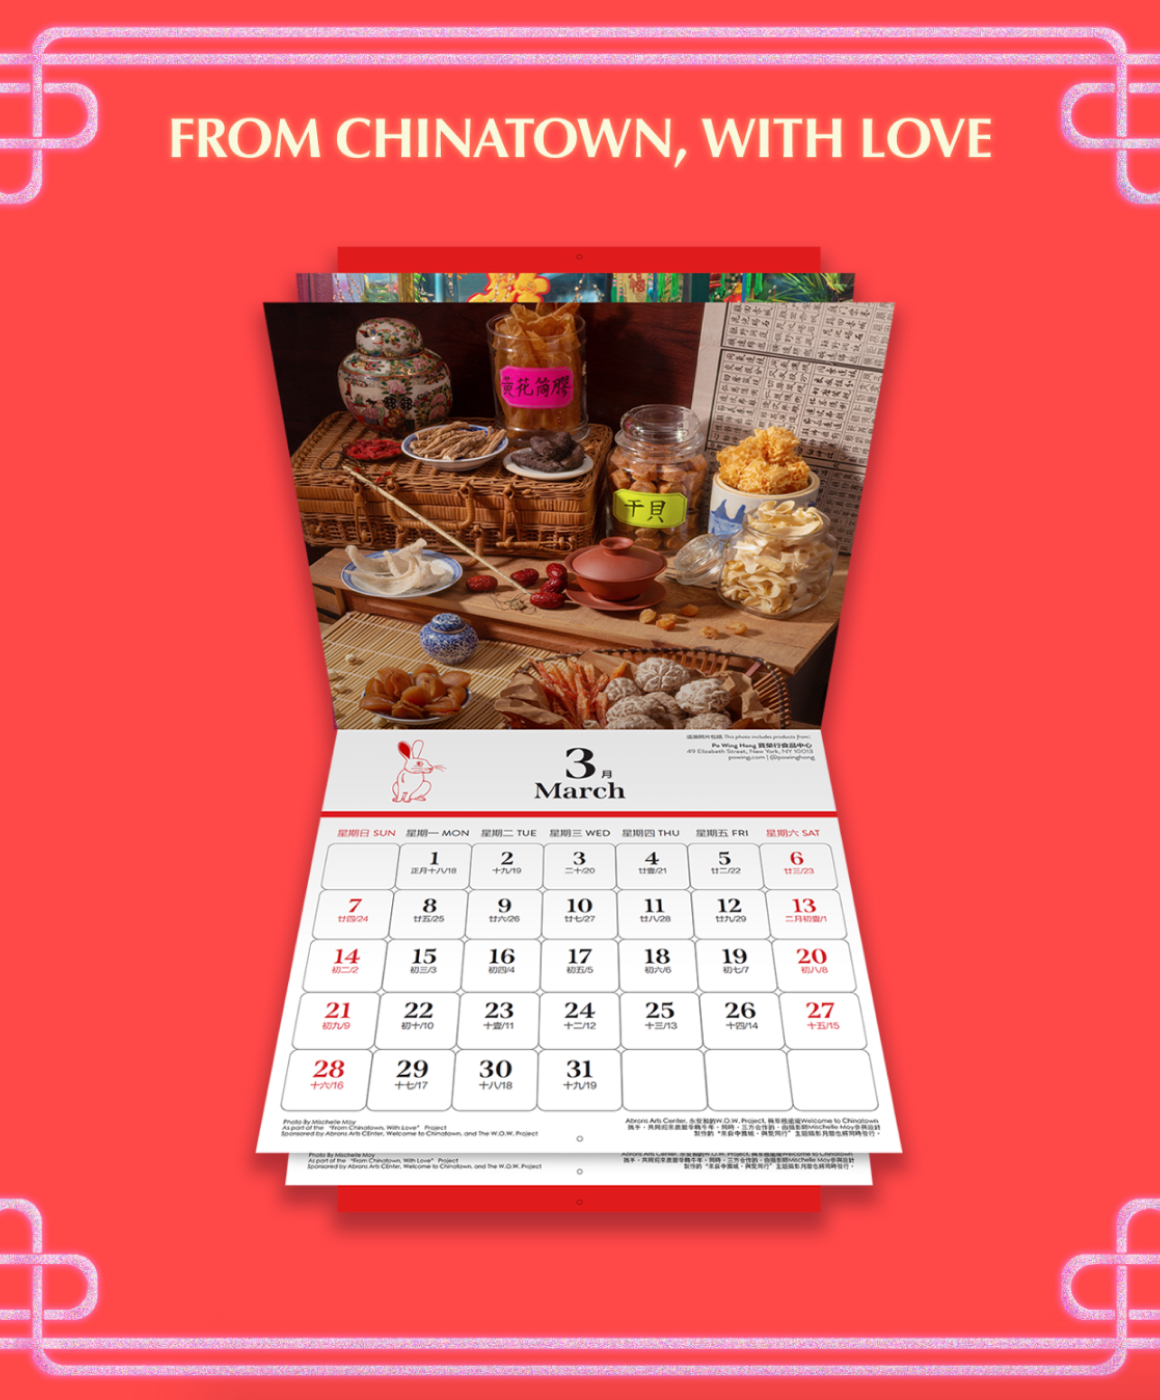 Promotional graphic for the "From Chinatown, With Love" 12-month calendar.